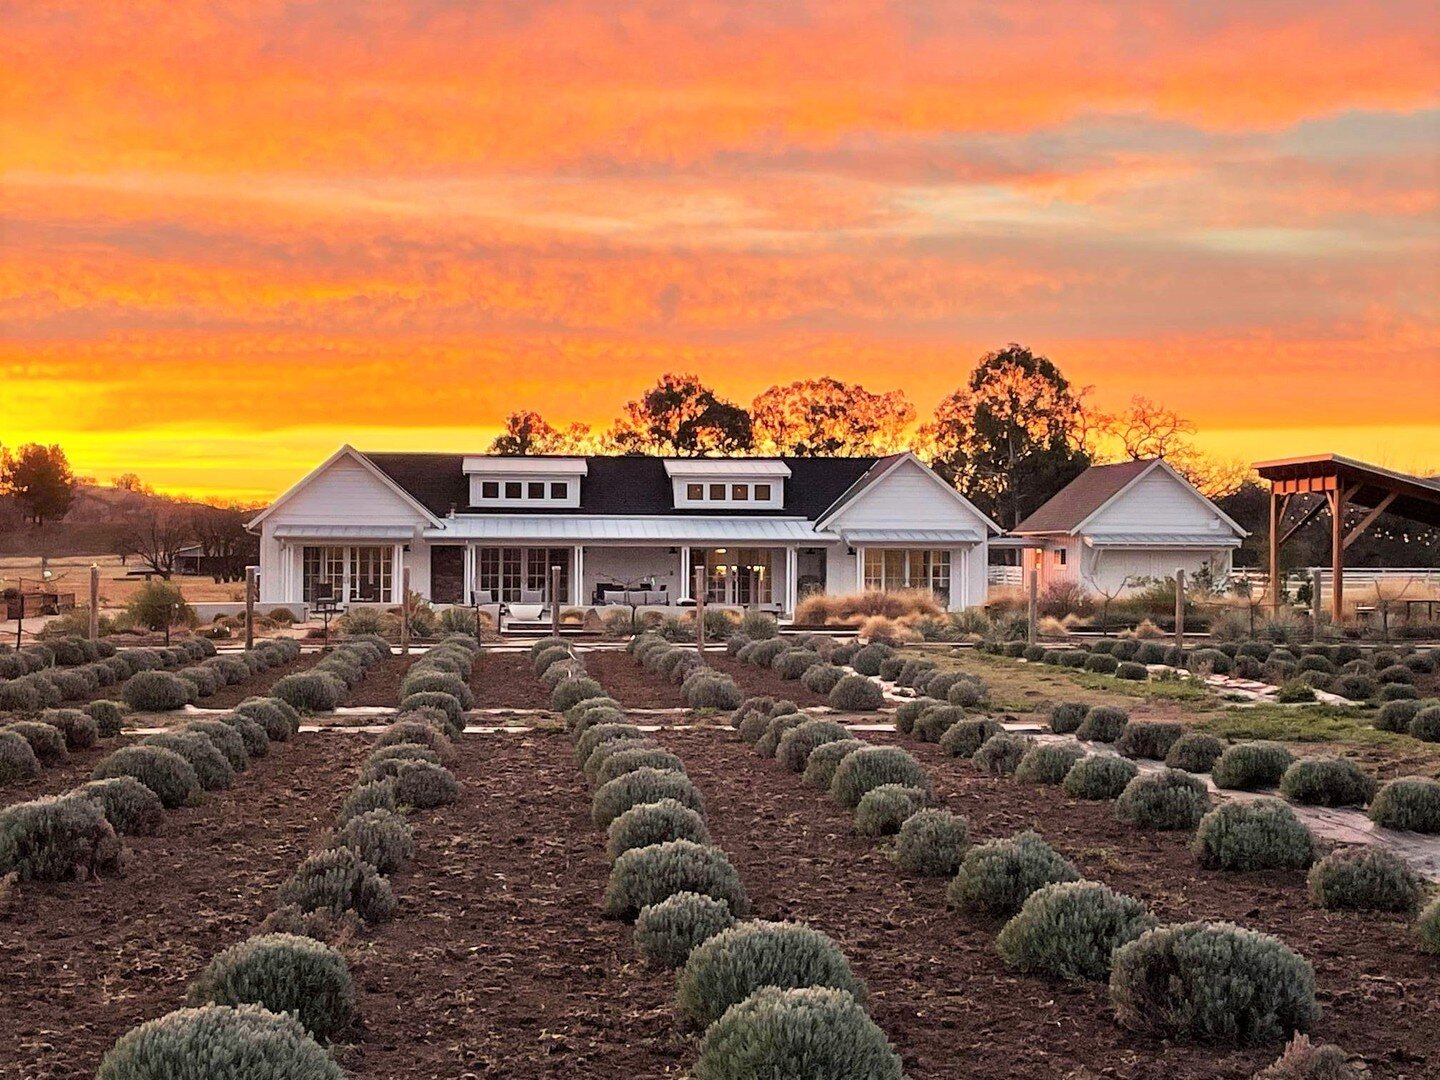 💜🌿 VISIT // looking for some fresh scents to fill your house? @capay_valley_lavender is hosting their Fall open house on Nov. 11-13. Stop by their farm store for some new items and don't leave without trying their lavender hot chocolate!